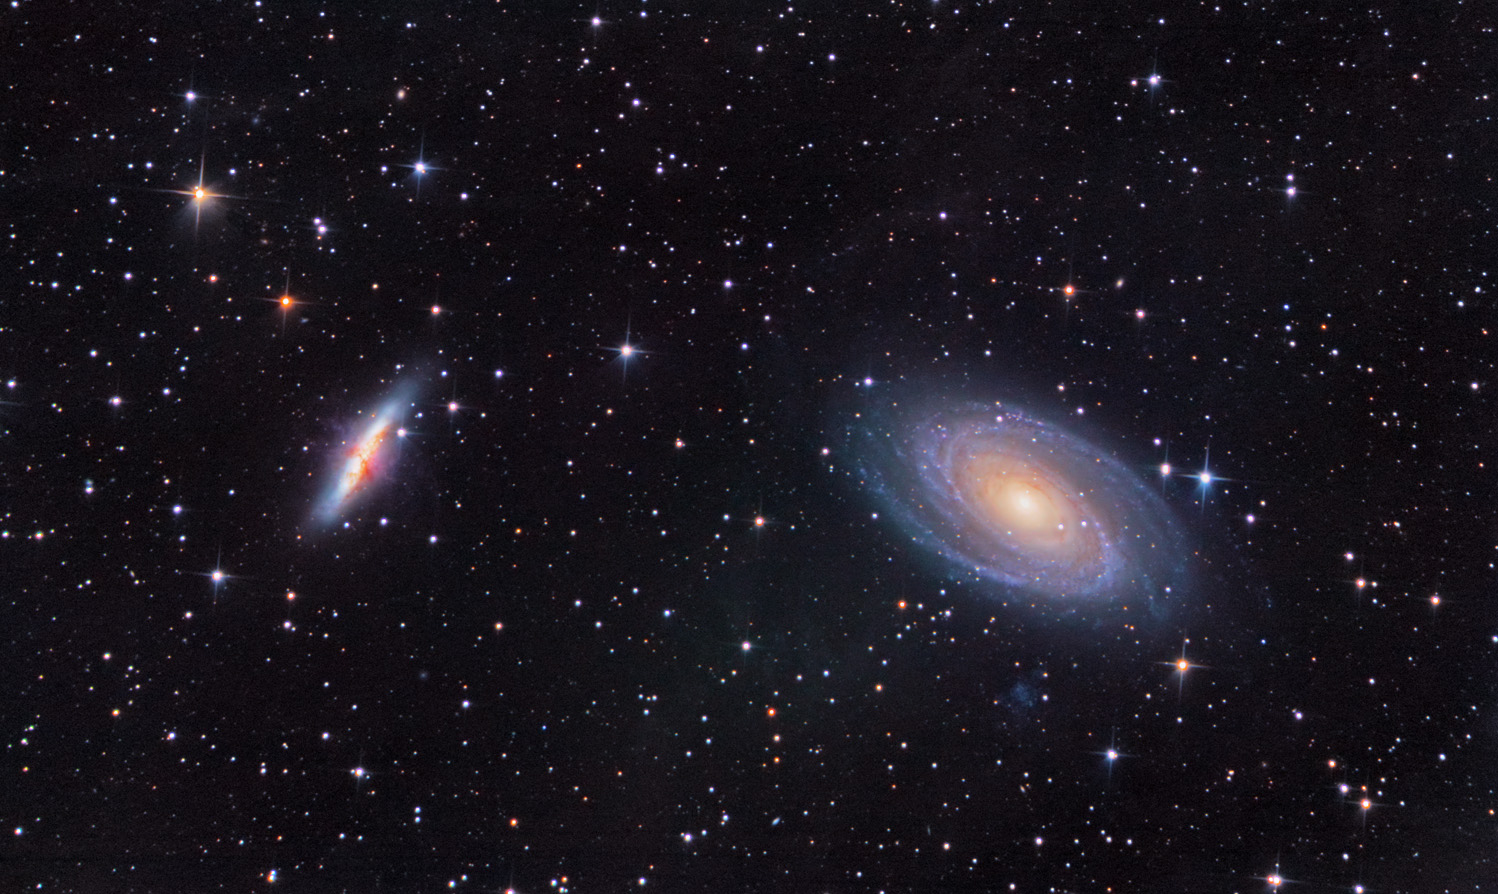 Two galaxies, one mostly edge-on and one mostly face-on, on a star-spotted field